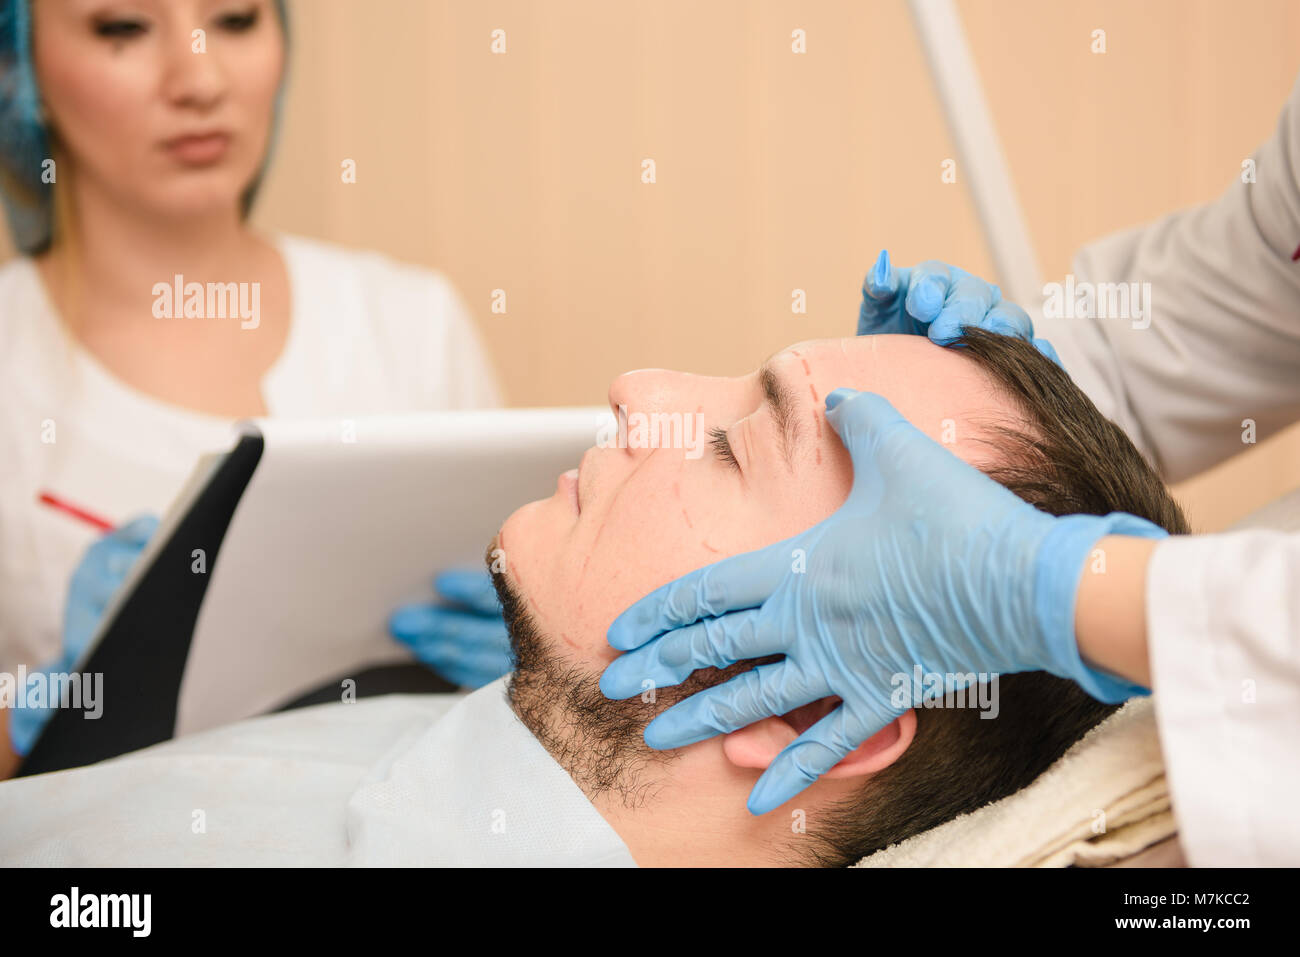 Consultance for man in private clinic of plastic surgery. Two doctors and patient. Hands of doctors in rubber blue gloves touch face. Stock Photo